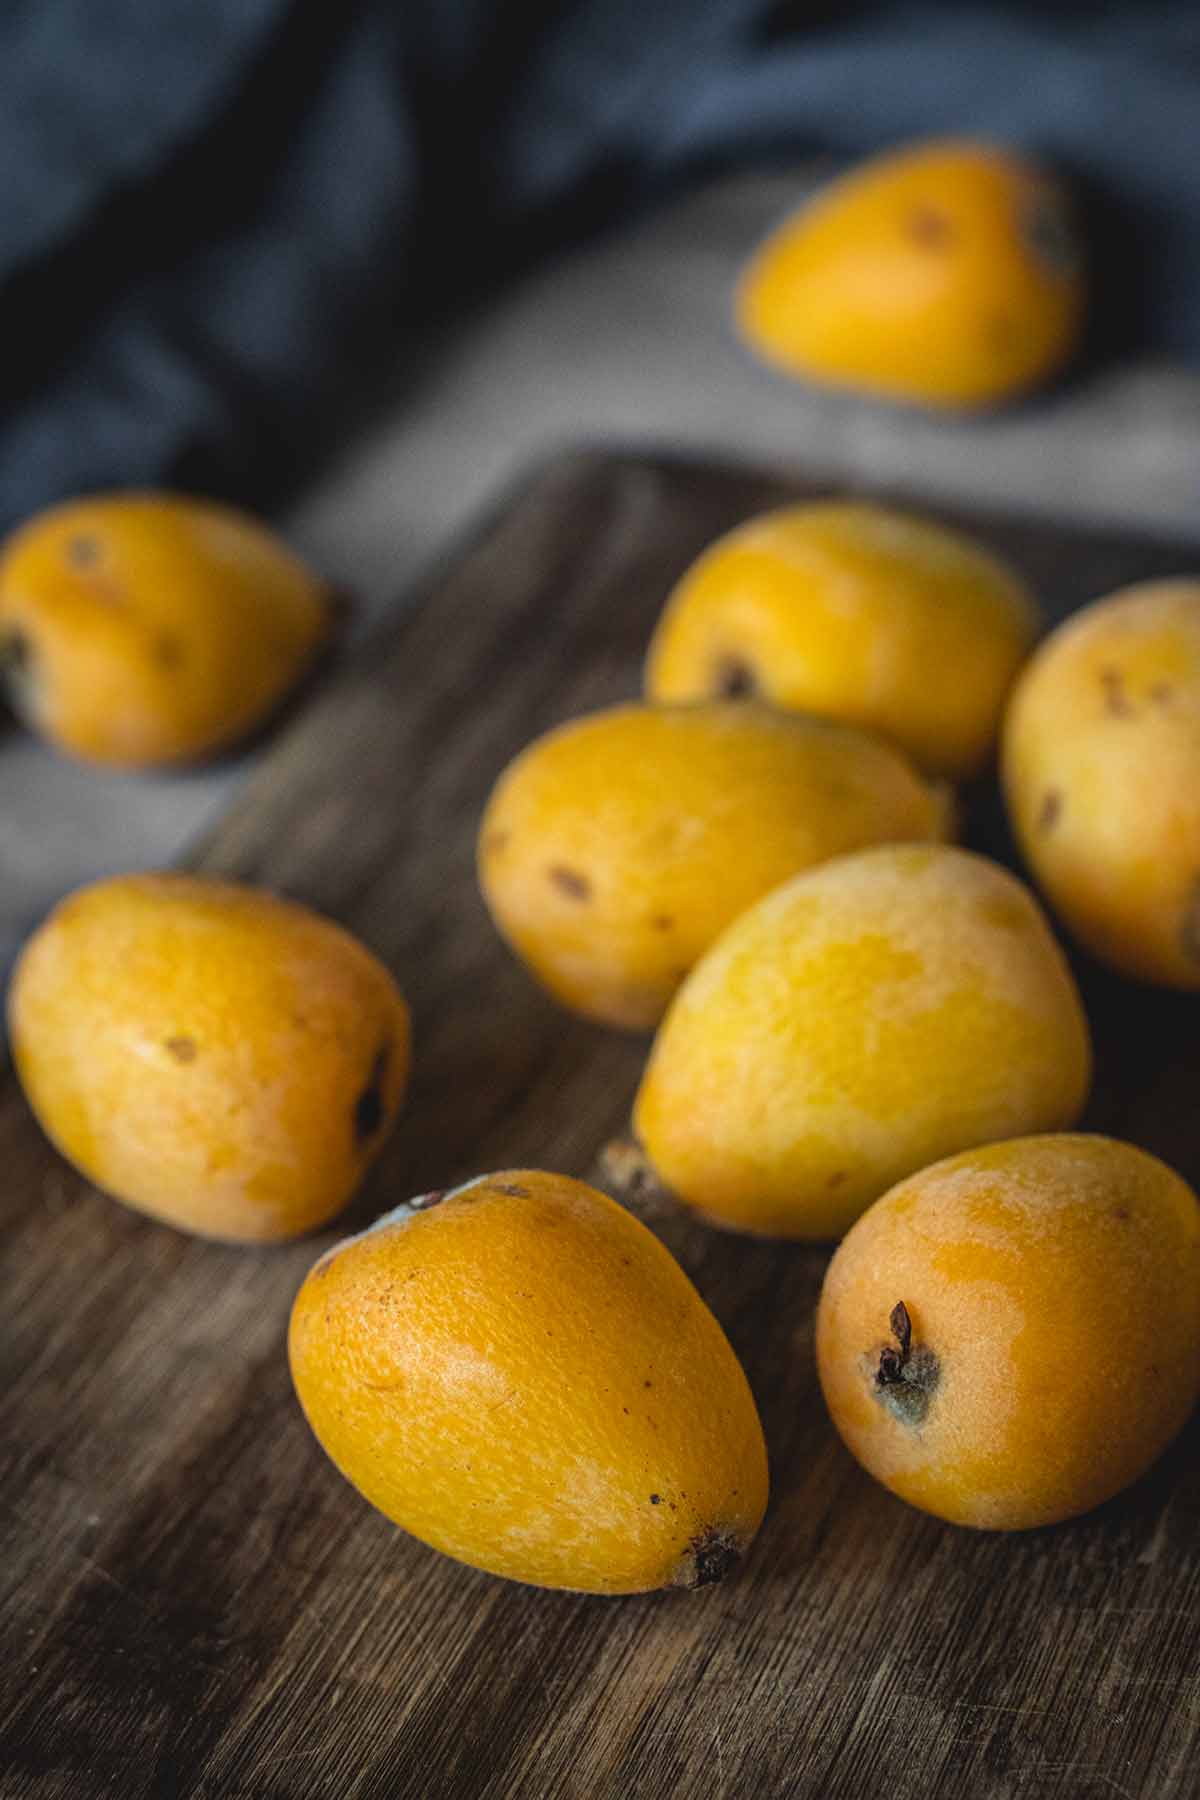 Whole loquat fruits on a table